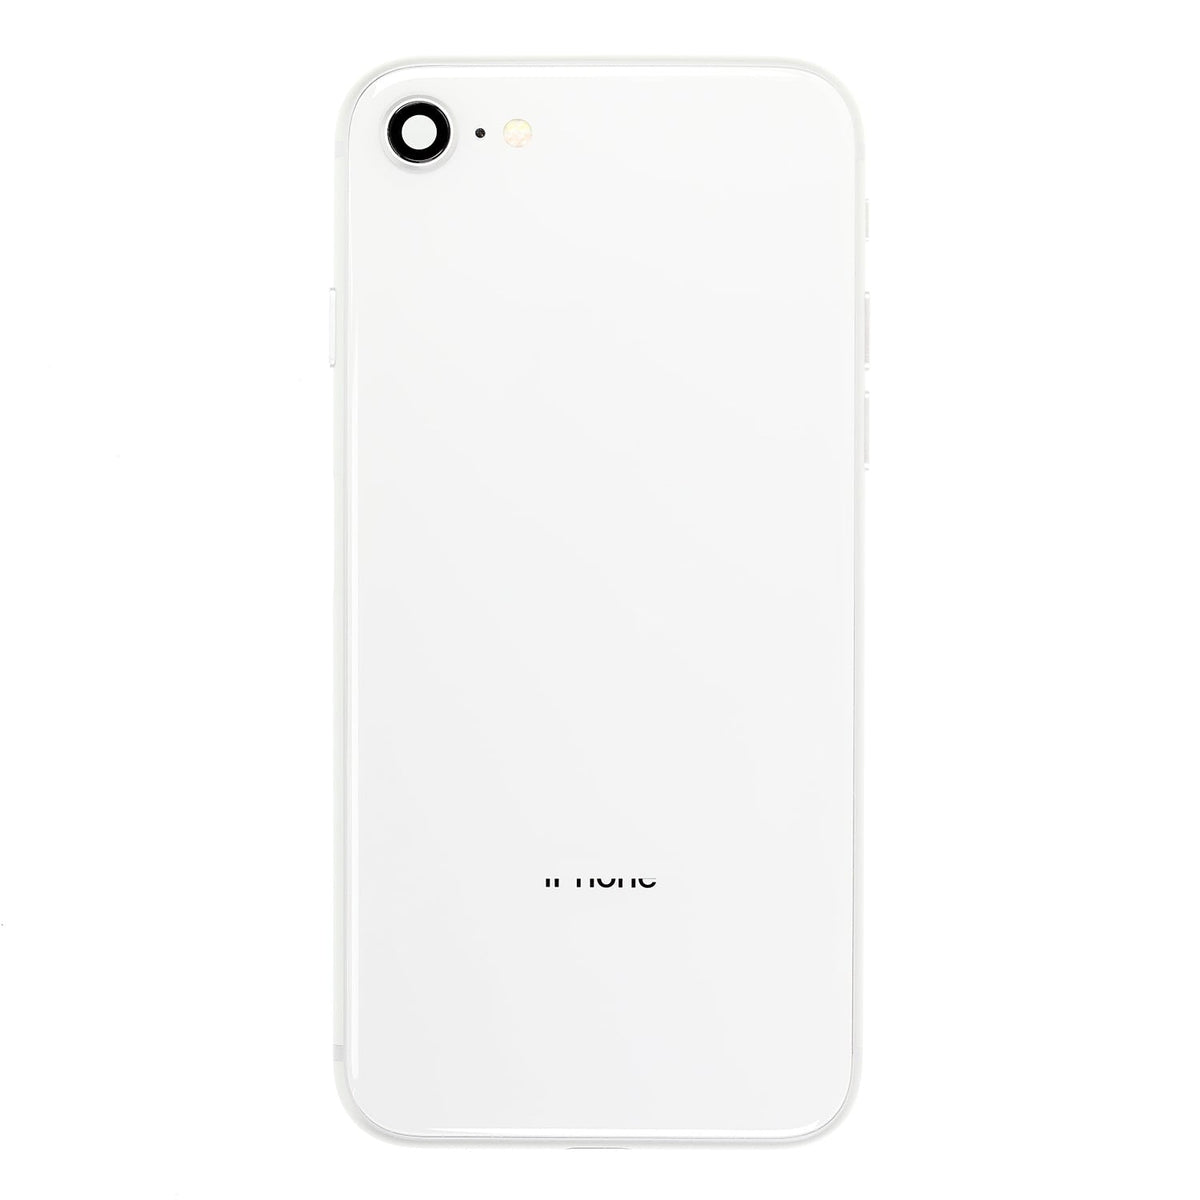 BACK COVER FULL ASSEMBLY FOR IPHONE 2ND - SILVER